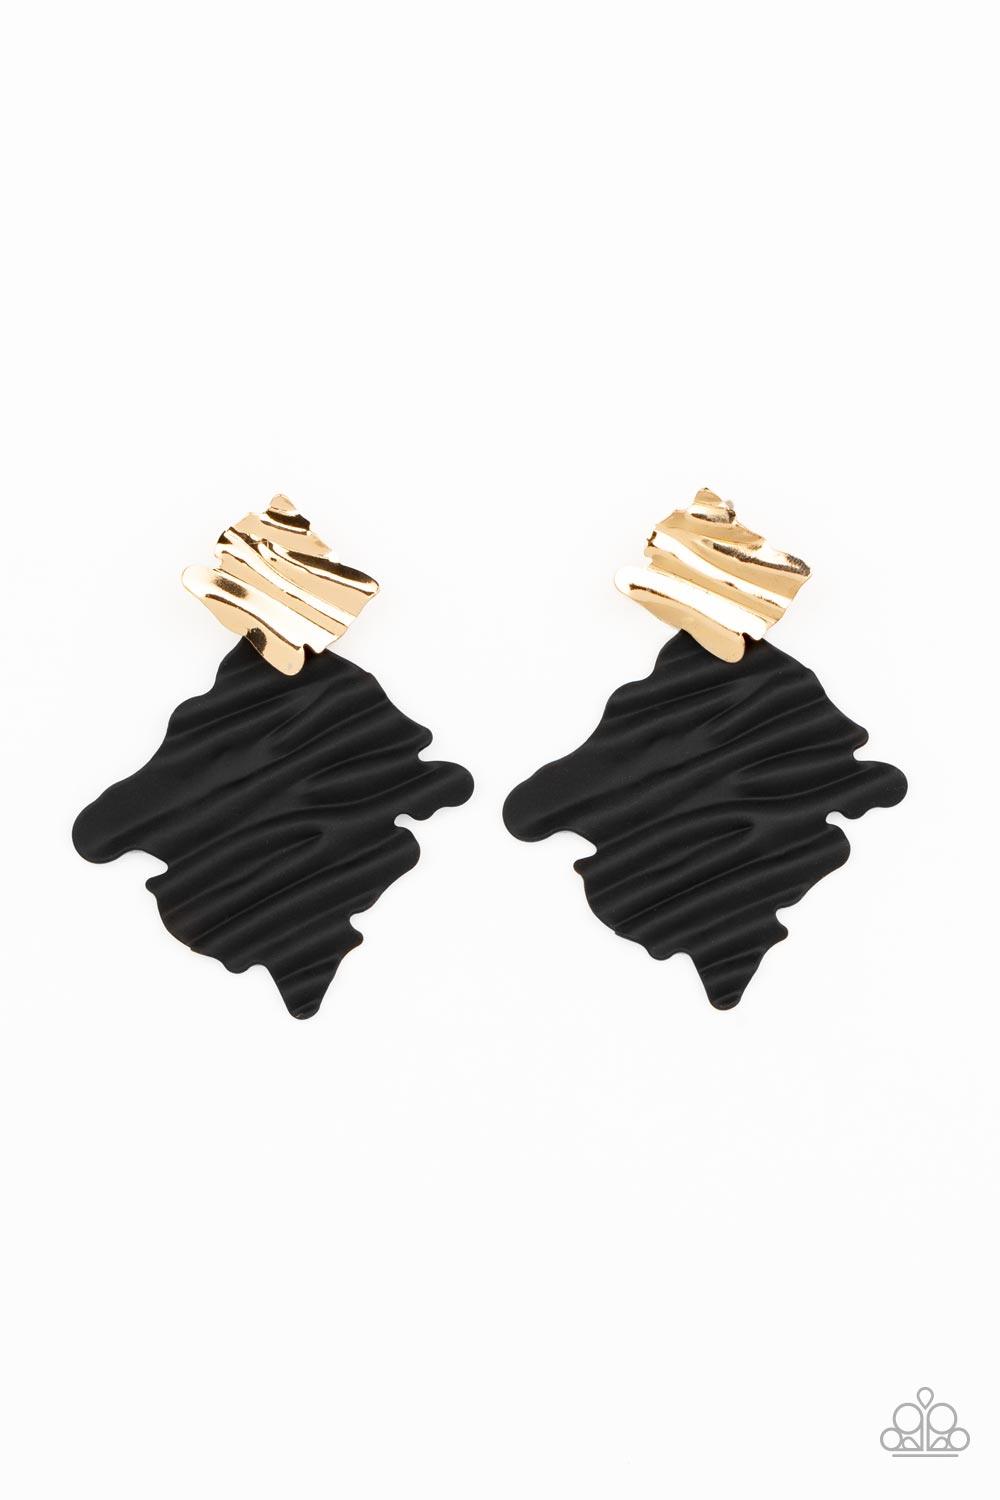 Paparazzi Accessories Crimped Couture - Gold Painted in a matte finish, a rippling black frame links to a dainty gold frame featuring crimped texture, resulting in a modern lure. Earring attaches to a standard post fitting. Sold as one pair of post earrin